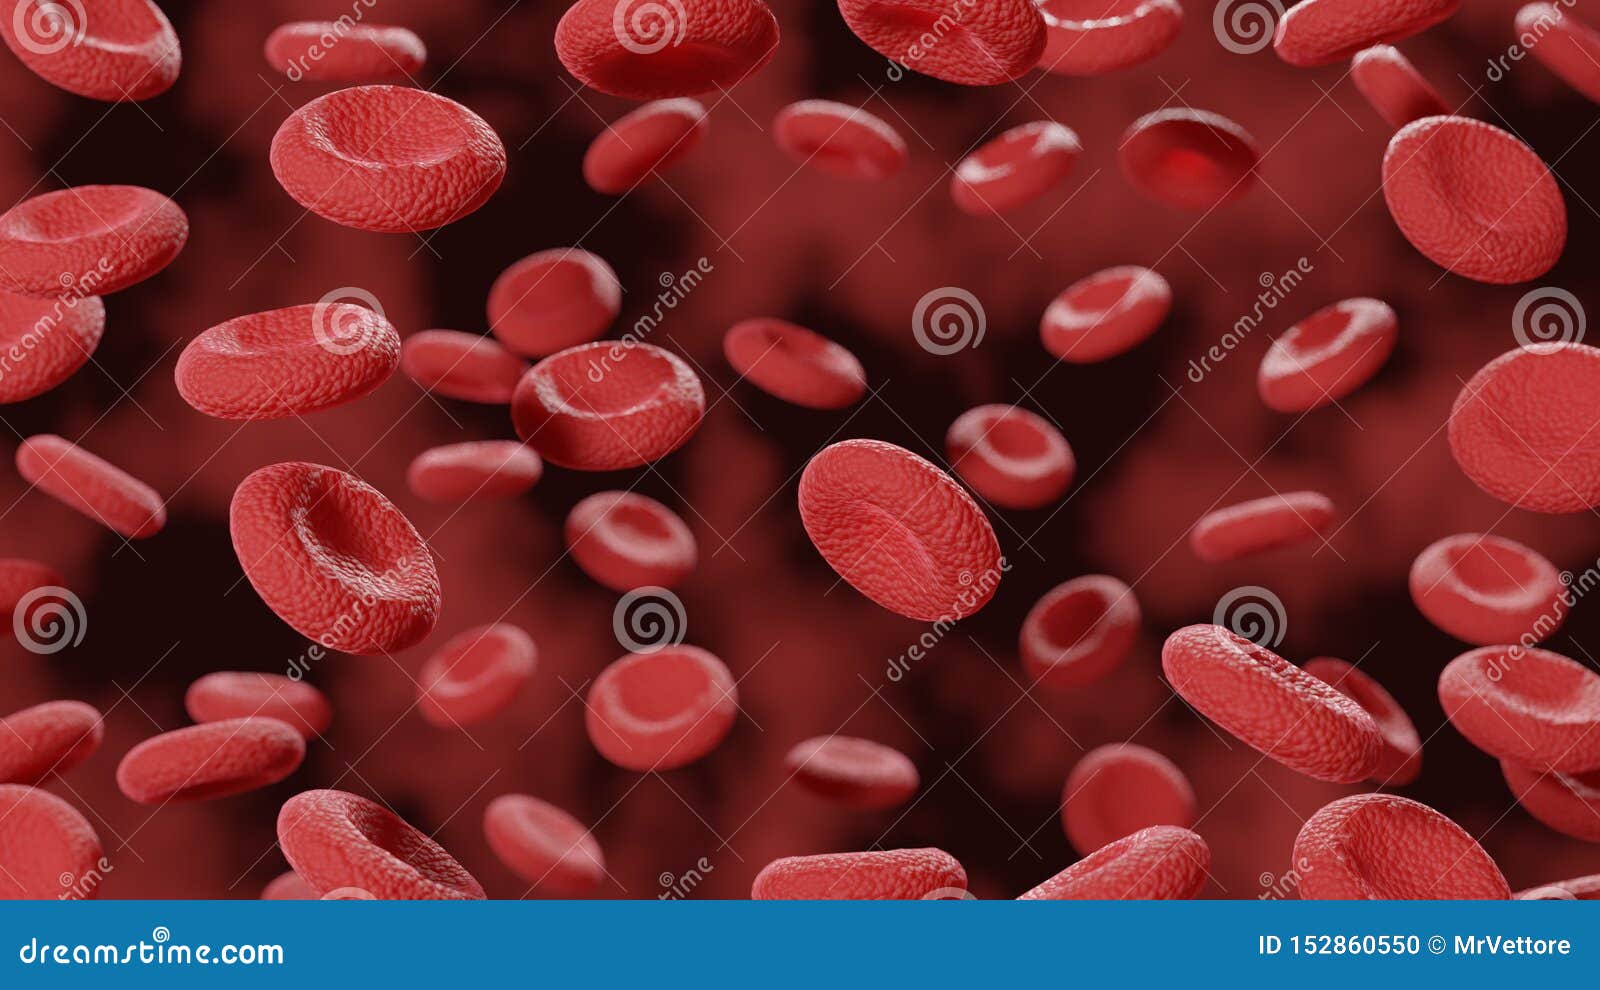 red blood cells in vena. microscope closeup view. science 3d 